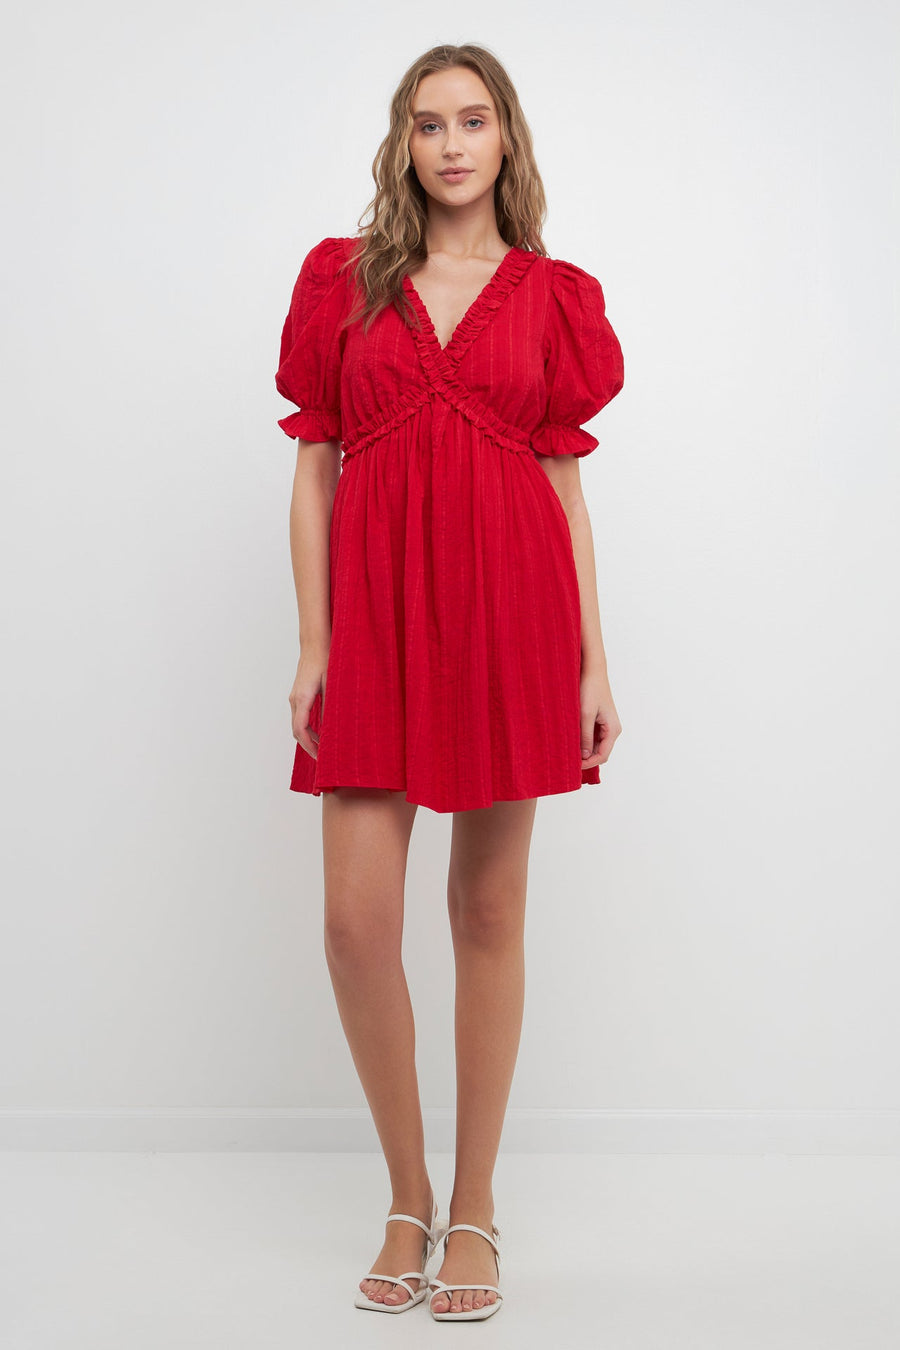 FREE THE ROSES-Double Ruffled Band Mini Puff Sleeve Dress-DRESSES available at Objectrare